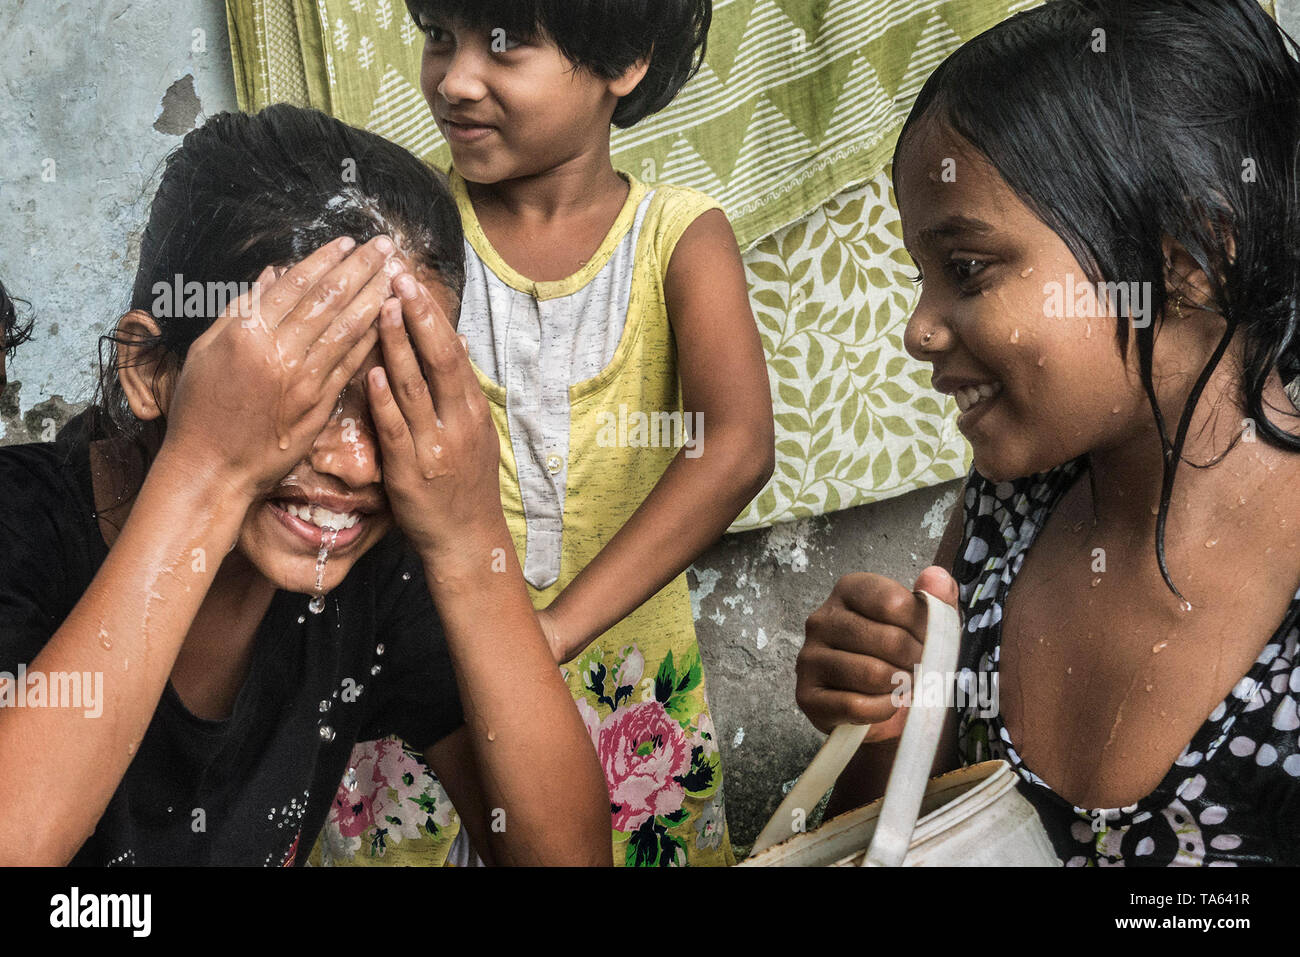 Kolkata. 22nd May, 2019. Indian children cool themselves at a slum area in a hot summer afternoon in Kolkata, India on May 22, 2019. Credit: Tumpa Mondal/Xinhua/Alamy Live News Stock Photo